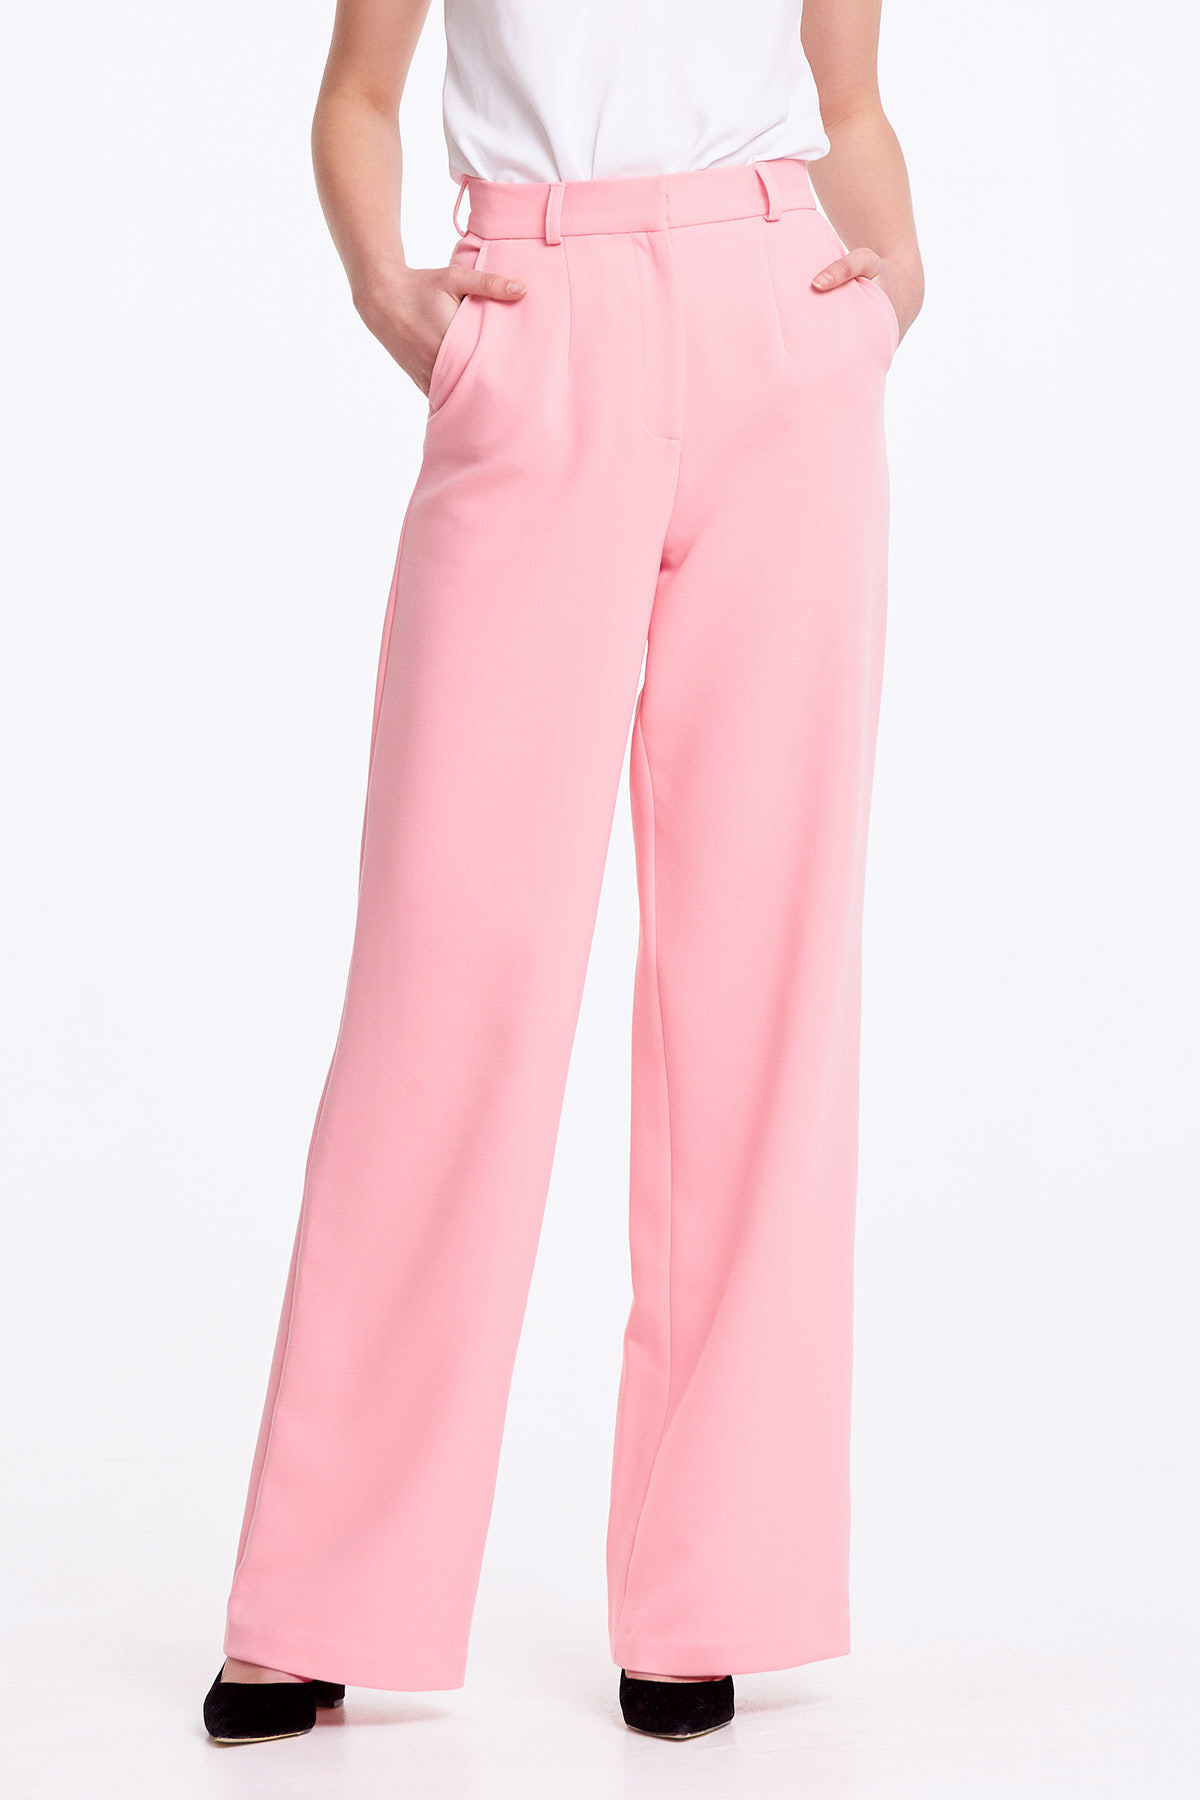 Wide leg pink trousers , photo 1